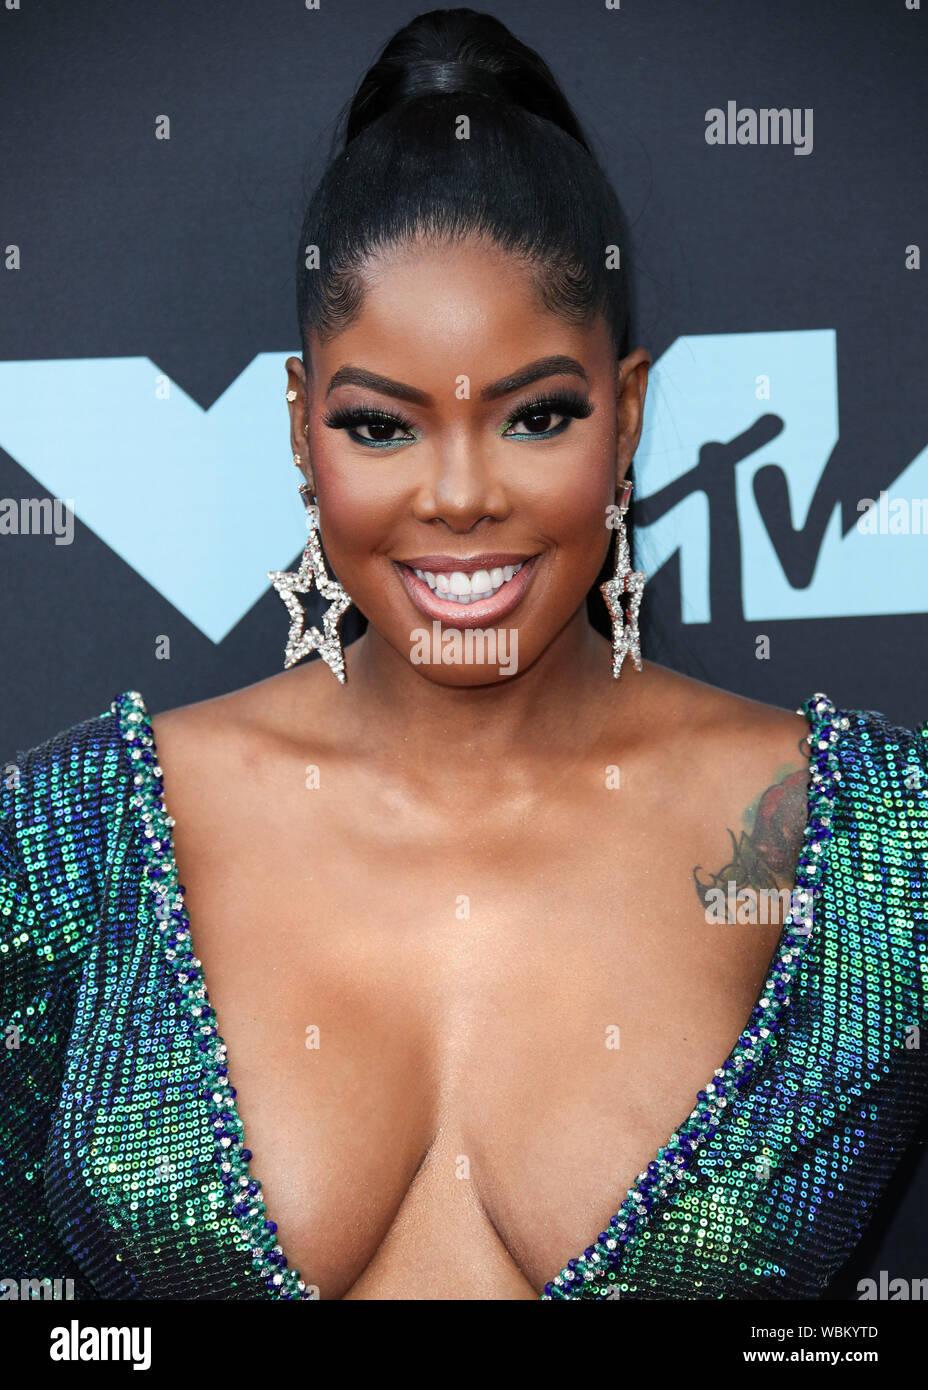 Newark, United States. 26th Aug, 2019. NEWARK, NEW JERSEY, USA - AUGUST 26: Juju Casteneda arrives at the 2019 MTV Video Music Awards held at the Prudential Center on August 26, 2019 in Newark, New Jersey, United States. (Photo by Xavier Collin/Image Press Agency) Credit: Image Press Agency/Alamy Live News Credit: Image Press Agency/Alamy Live News Stock Photo